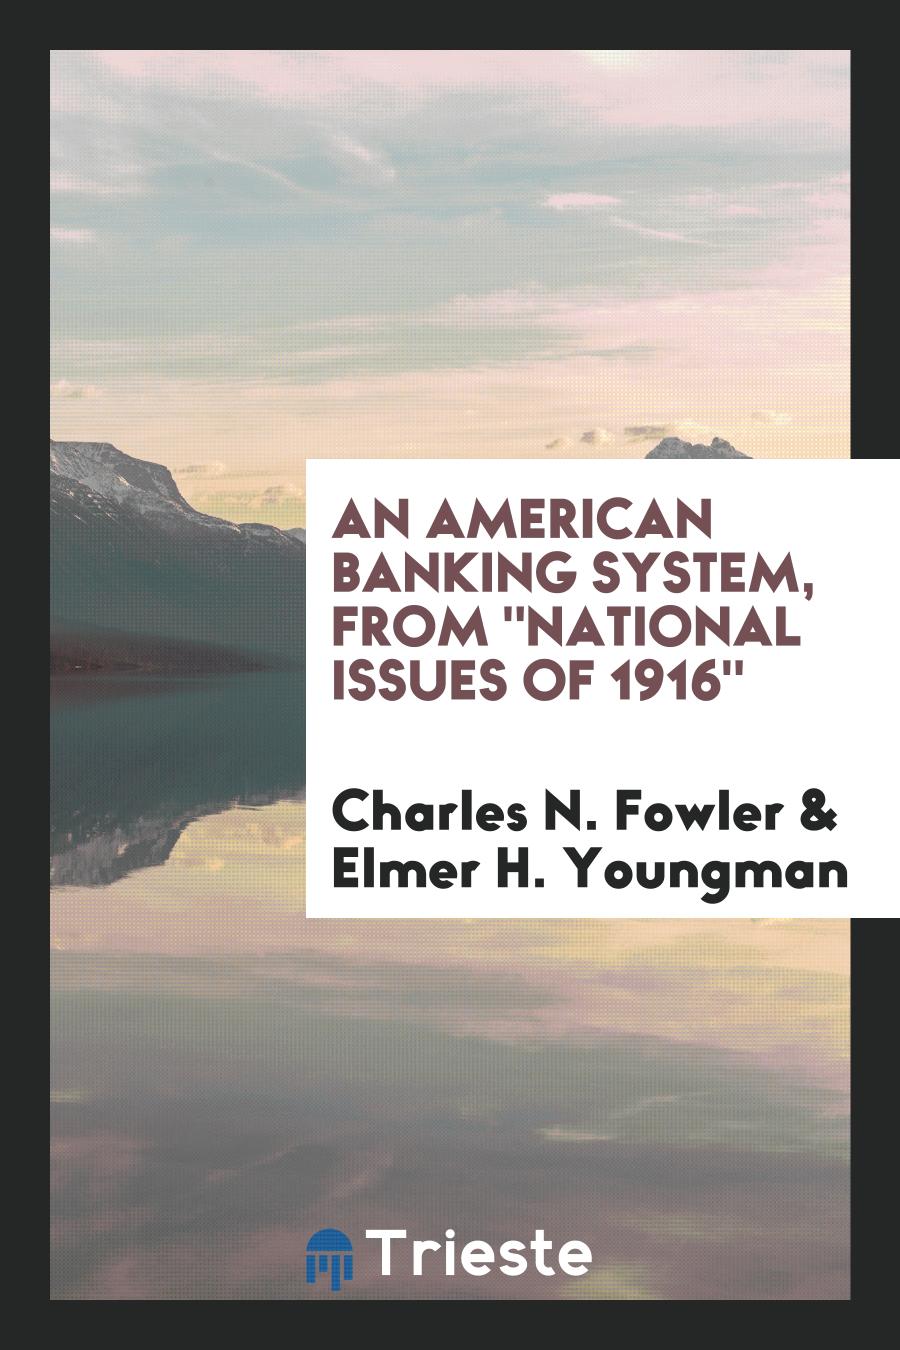 An American Banking System, from "National Issues of 1916"